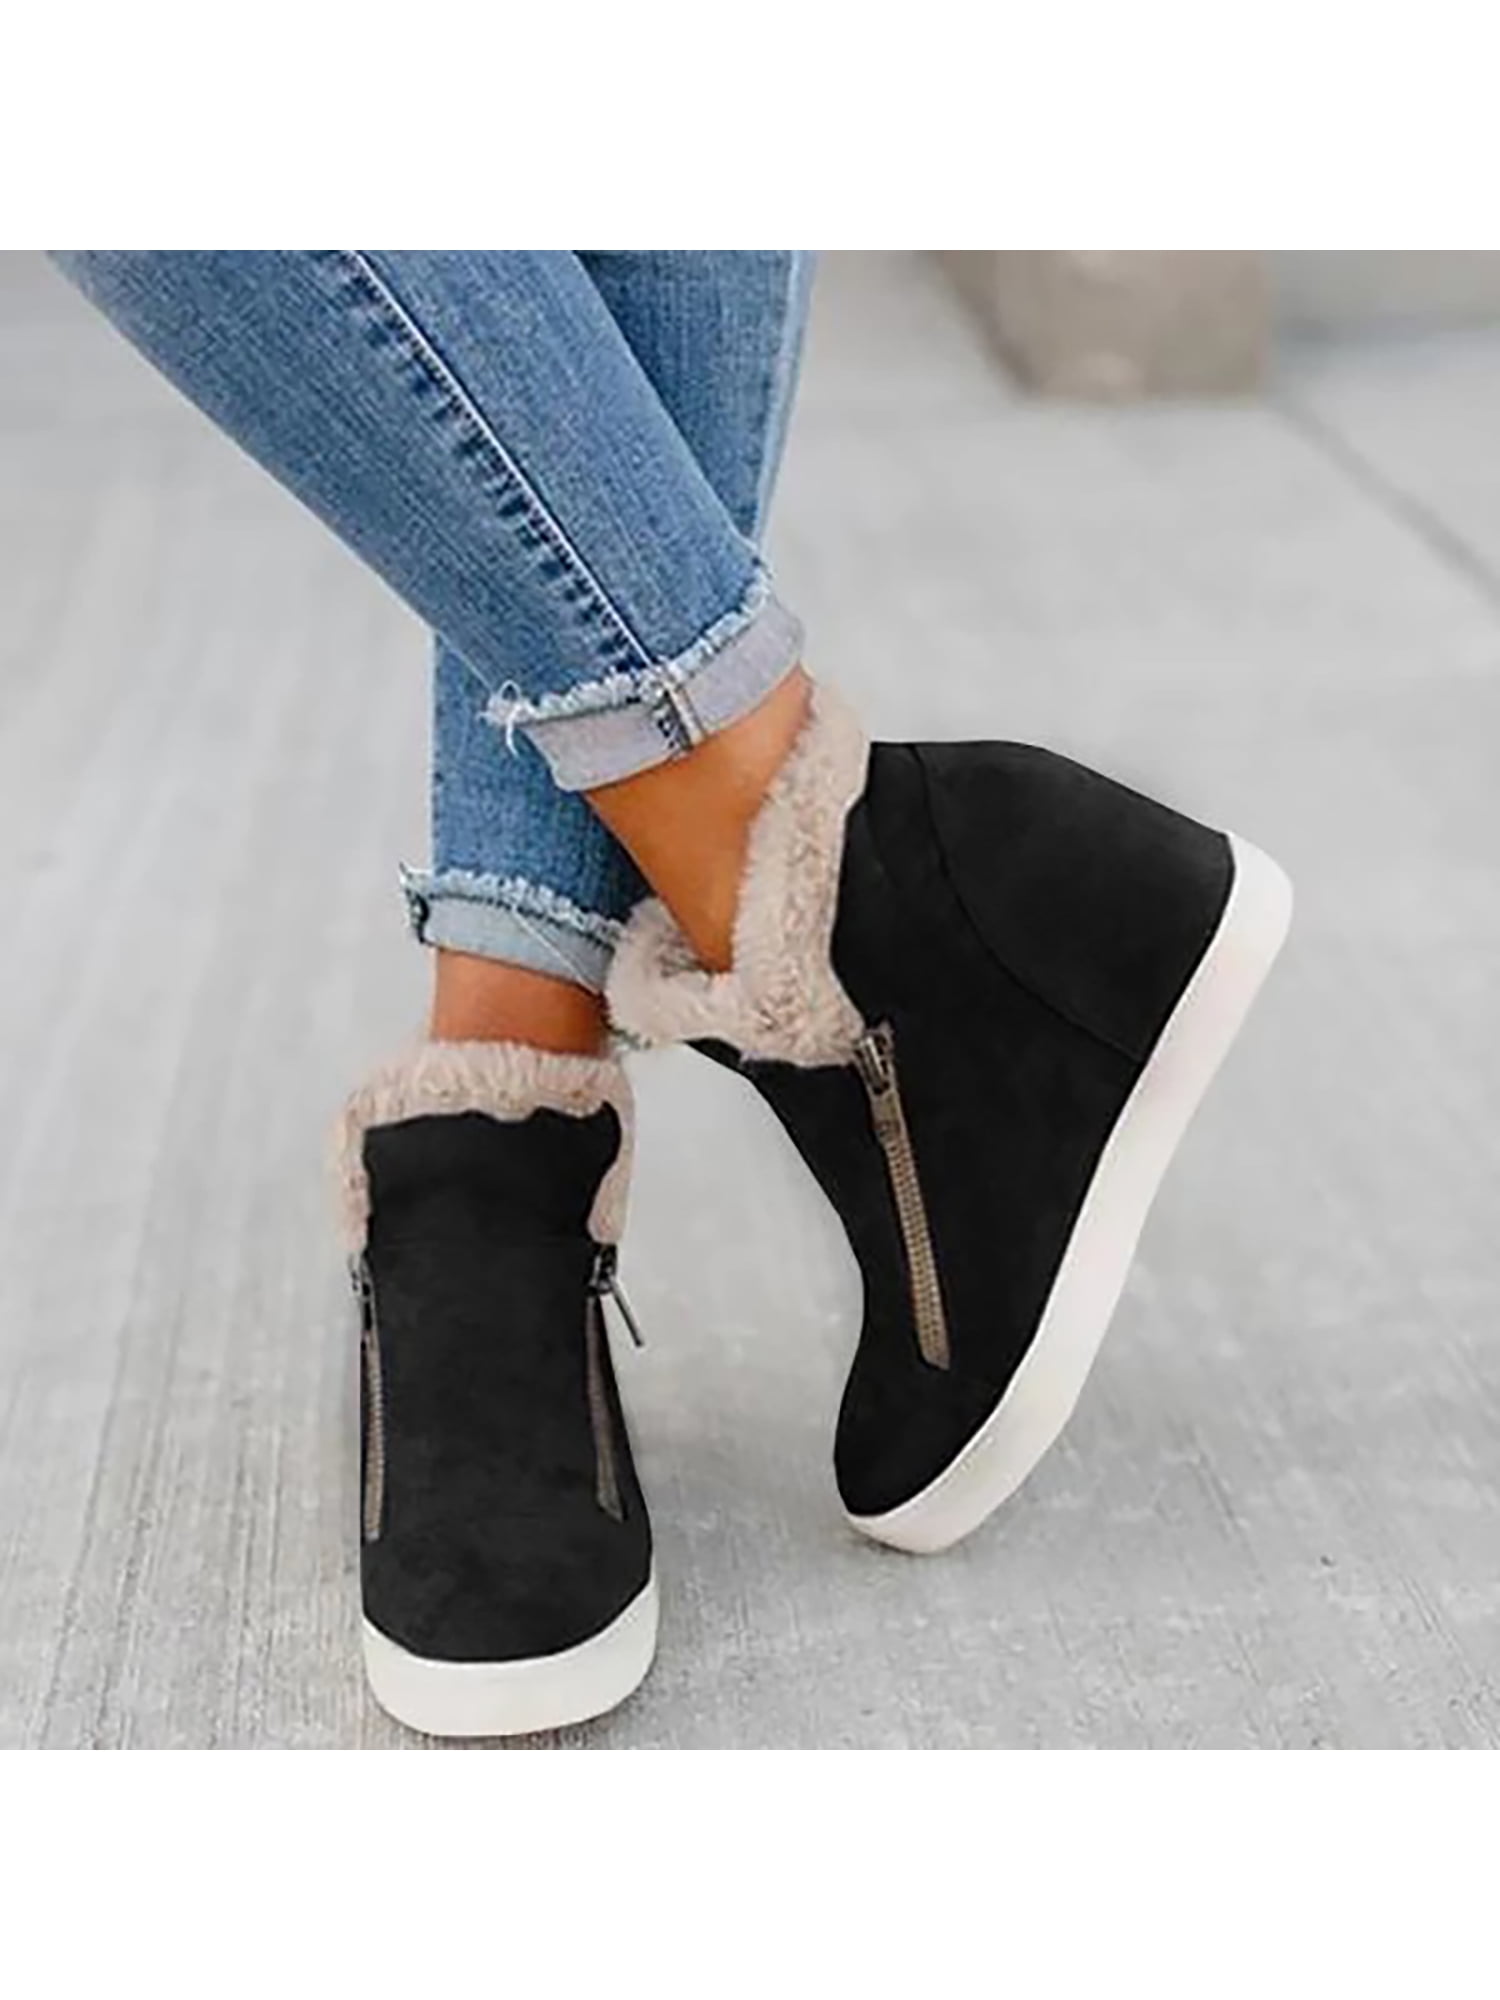 Details about  / New Womens Hidden Wedge Heels Ankle Boots Winter Snow Boots Fur Trim Warm xiang